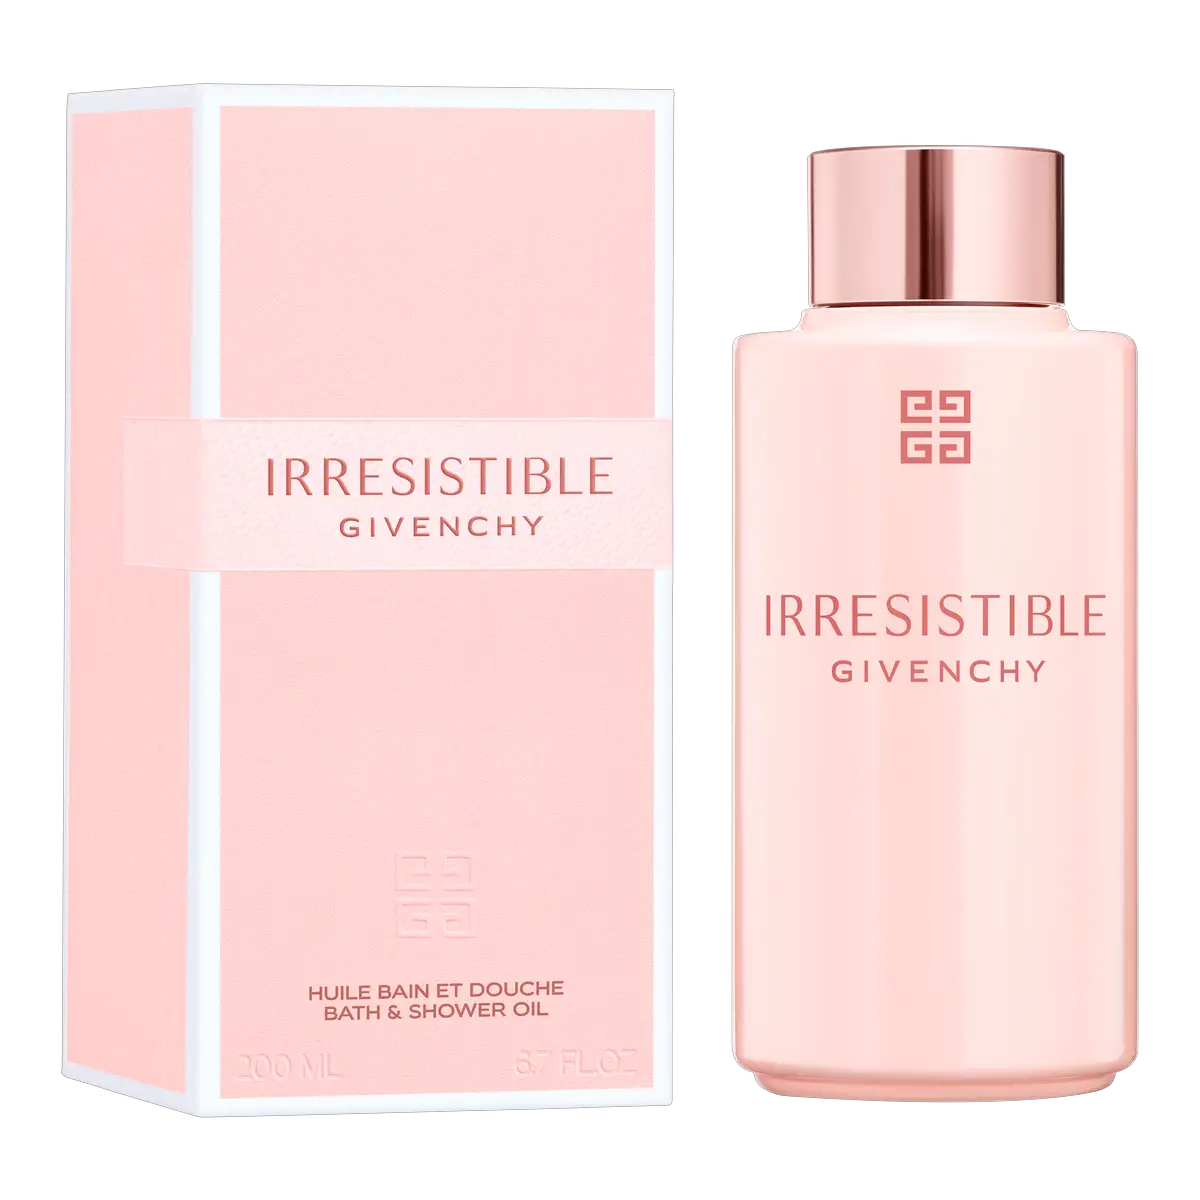 Irresistible Givenchy Bath & Shower Oil